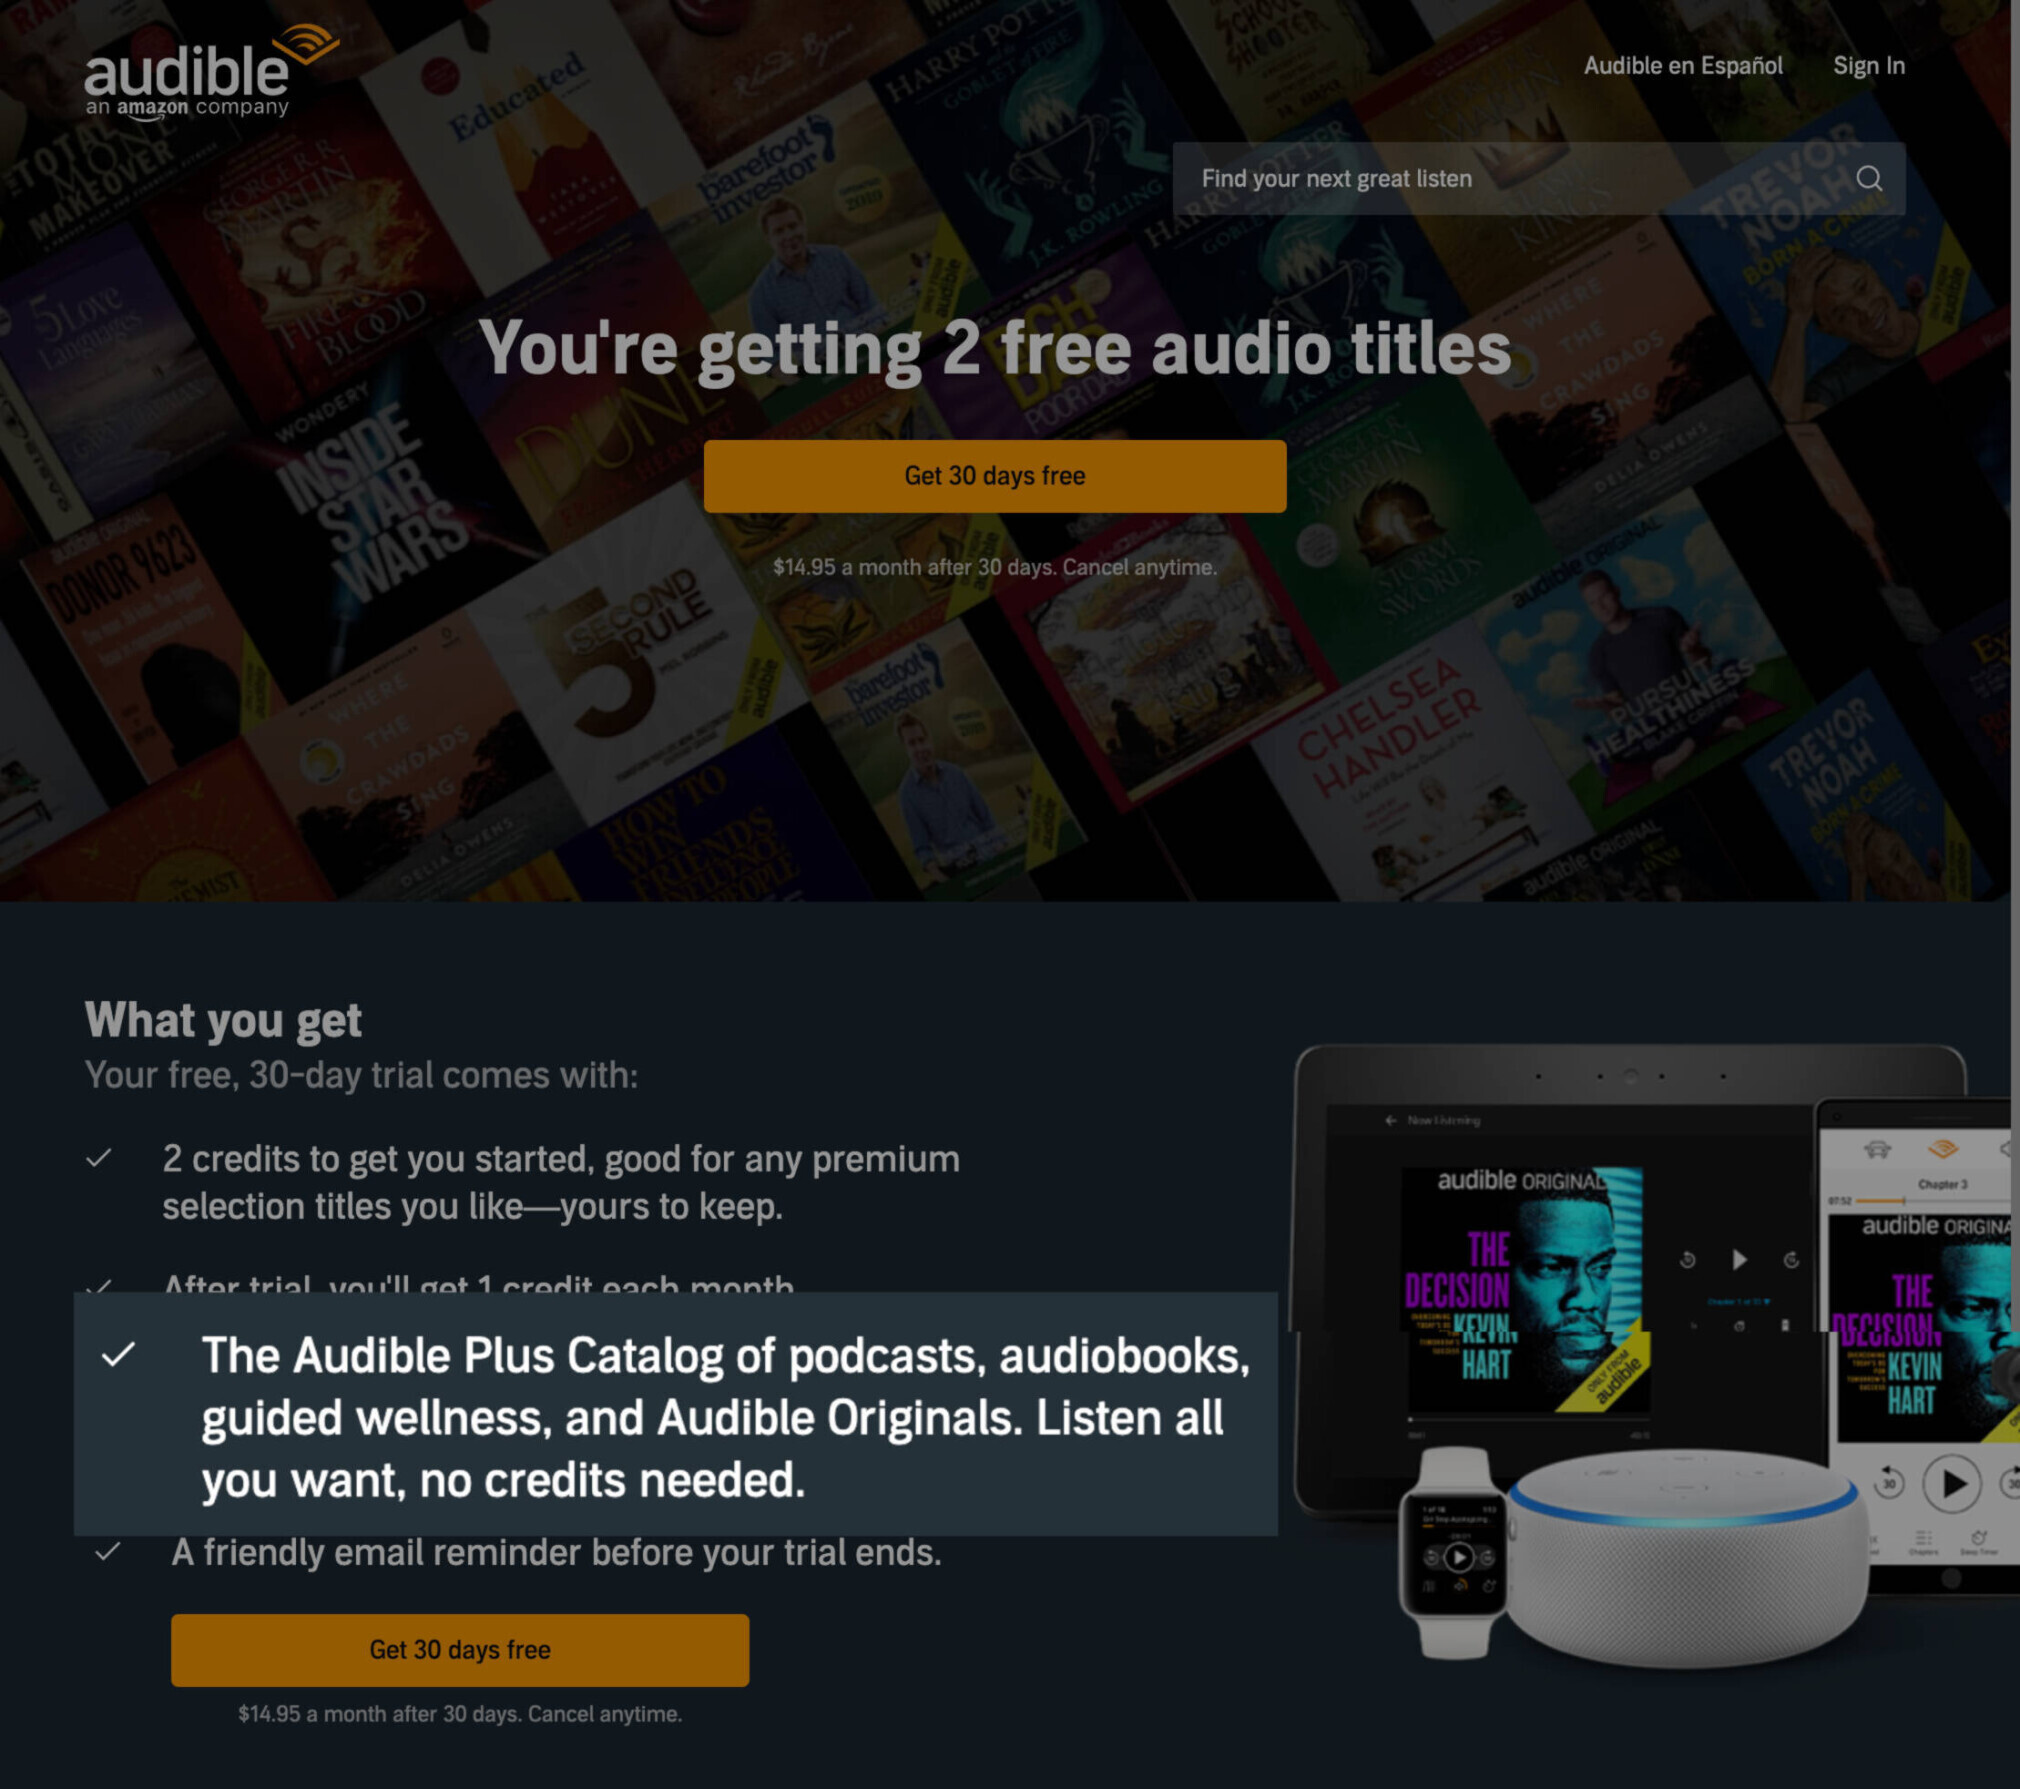 Audible's landing page that also highlights their large catalog